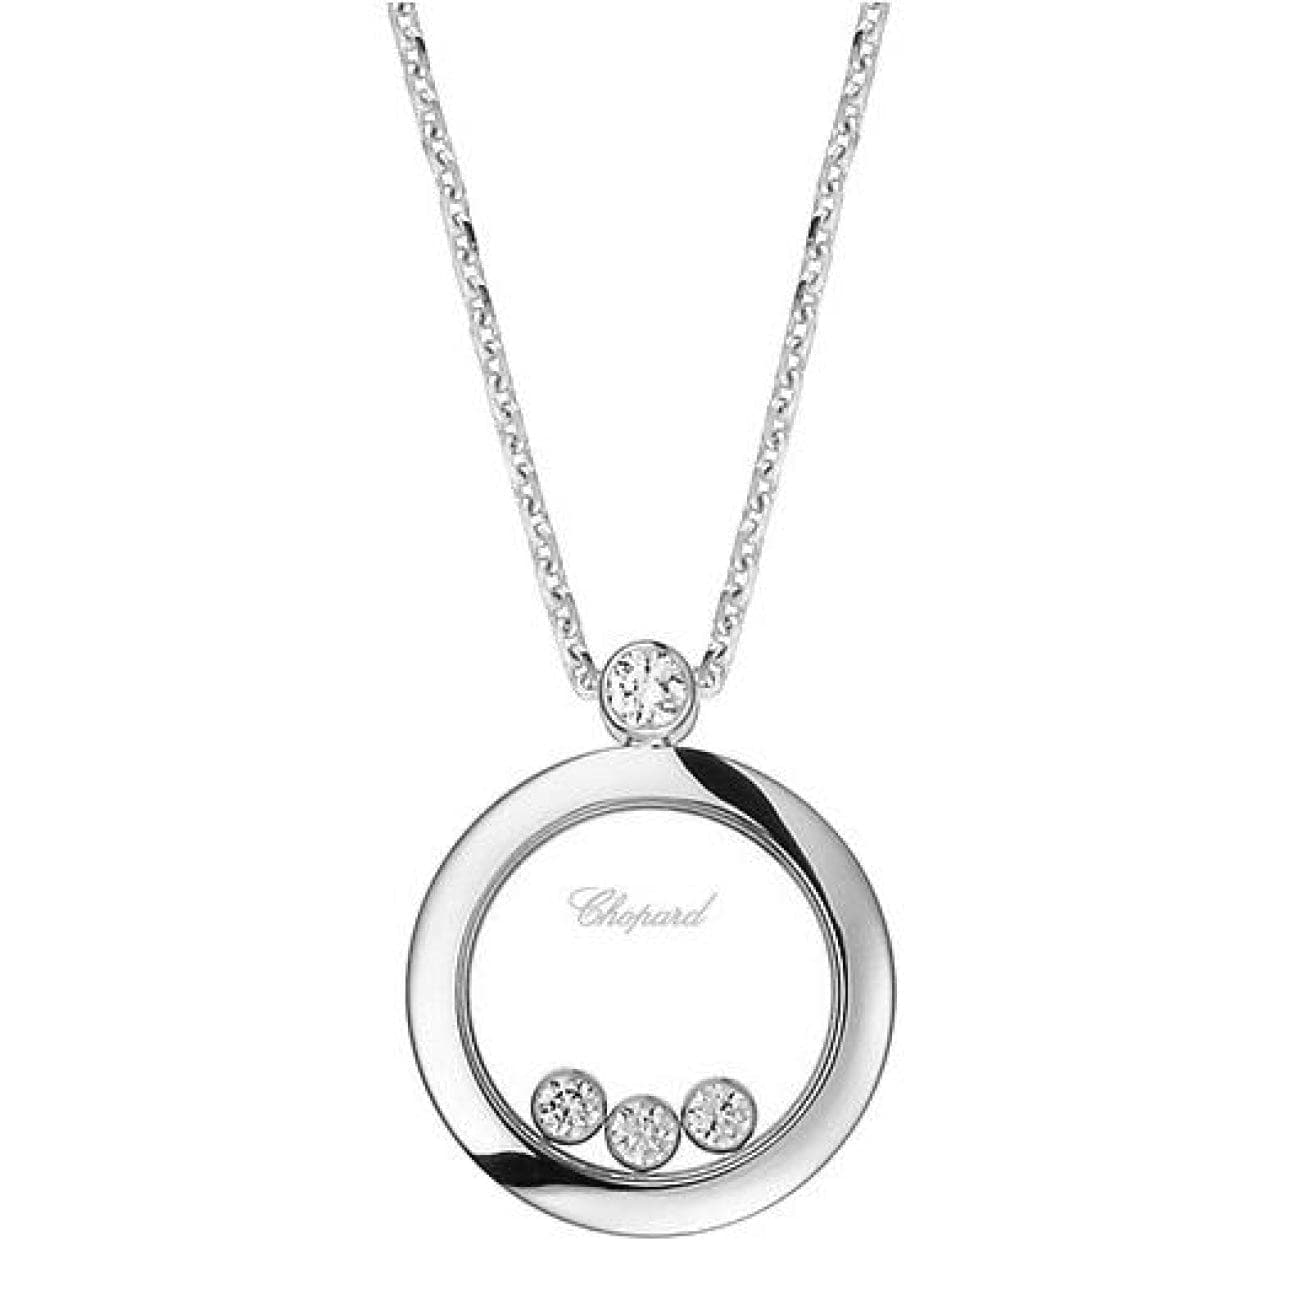 Sold at Auction: Chopard 3.00ctw Diamond and 18K Happy Diamond Necklace